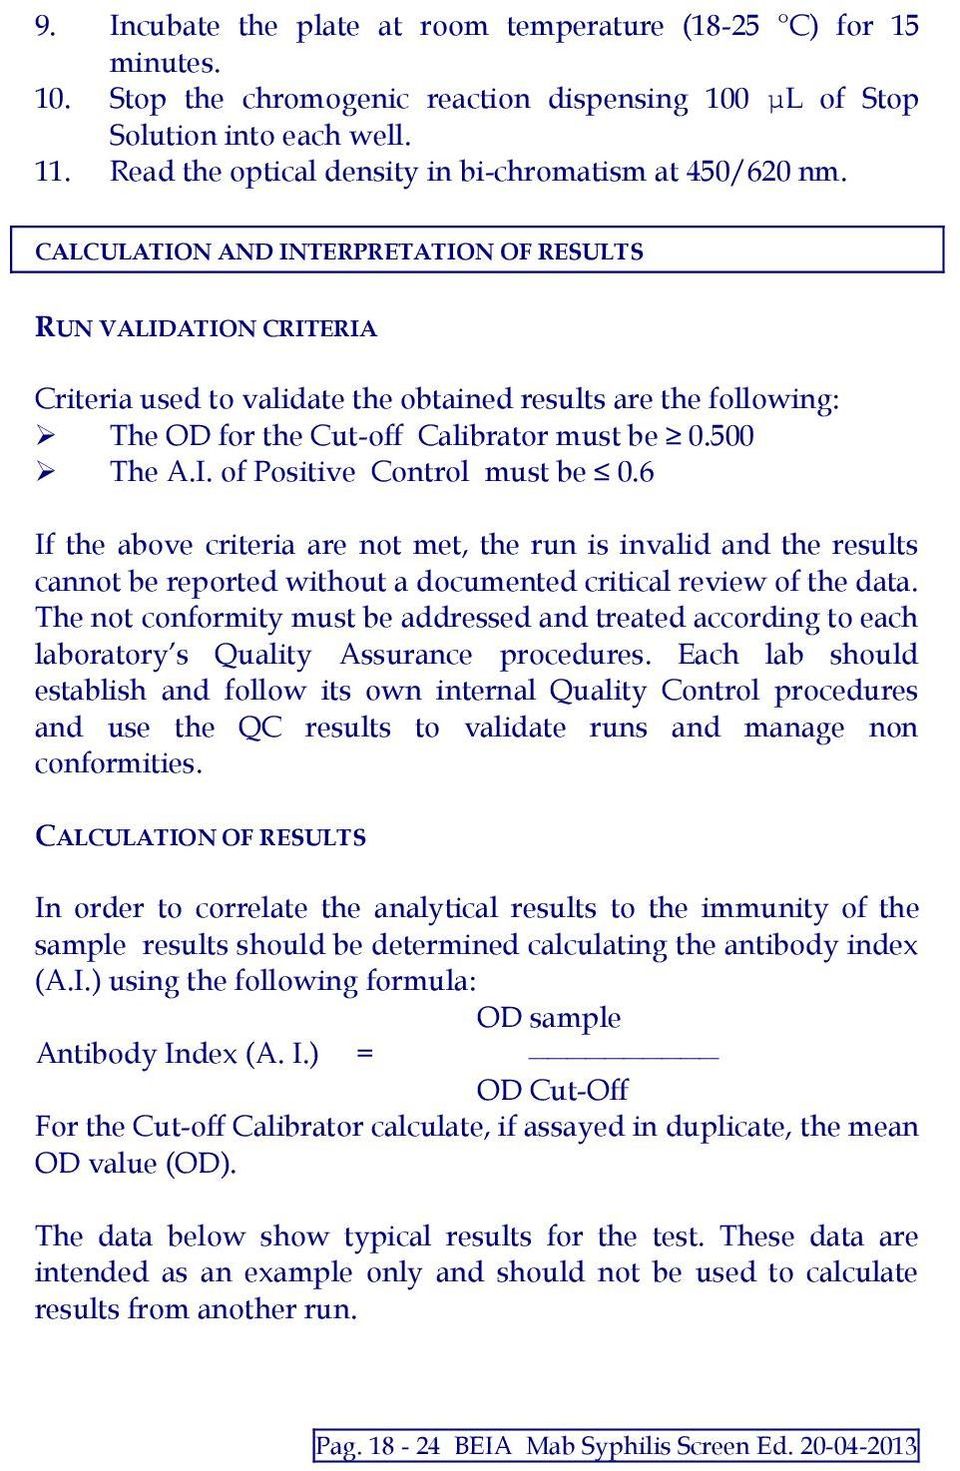 CALCULATION AND INTERPRETATION OF RESULTS RUN VALIDATION CRITERIA Criteria used to validate the obtained results are the following: The OD for the Cut-off Calibrator must be 0.500 The A.I. of Positive Control must be 0.